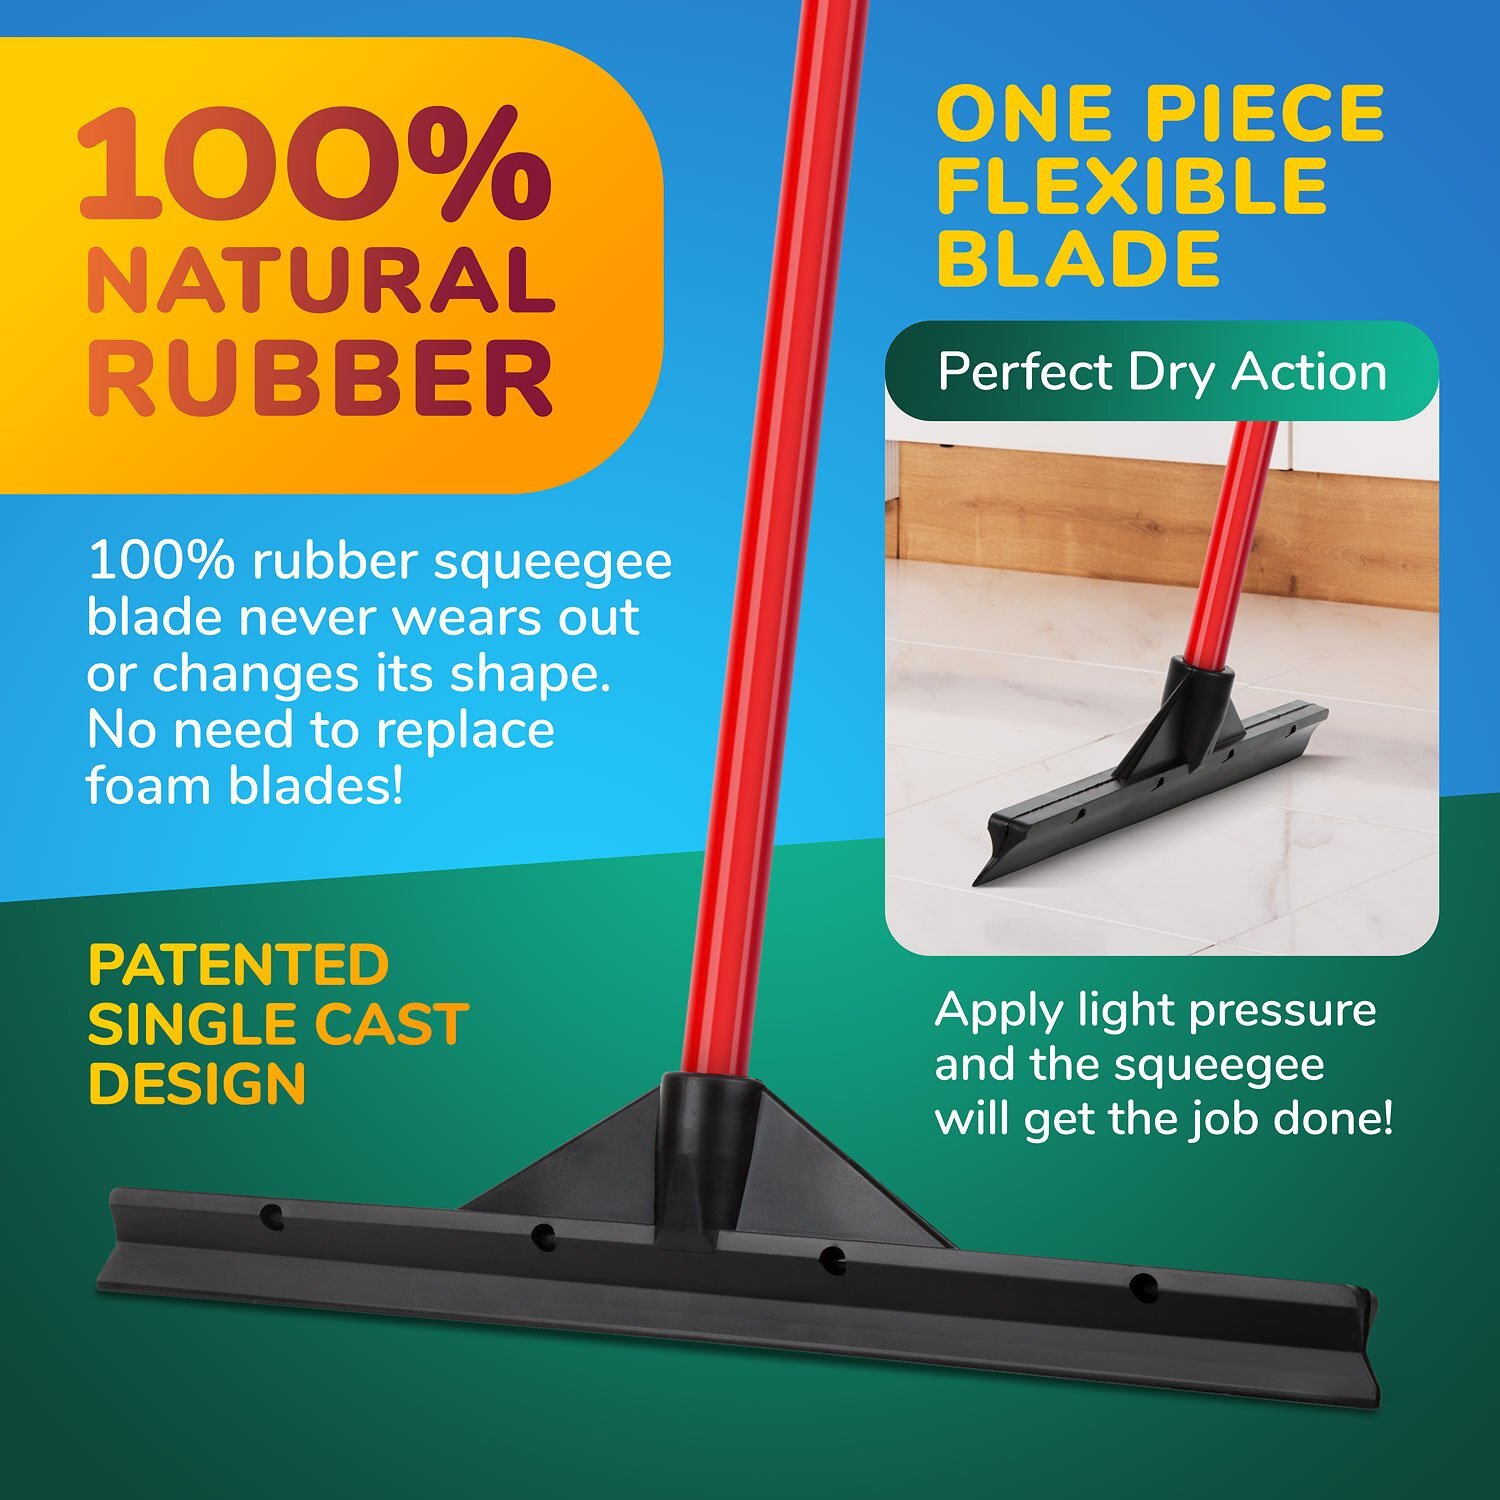 Tyroler BrightTools Silicone Squeegee + FREE 1PK Floor Wipes 2-in-1 Floor  Cleaning System